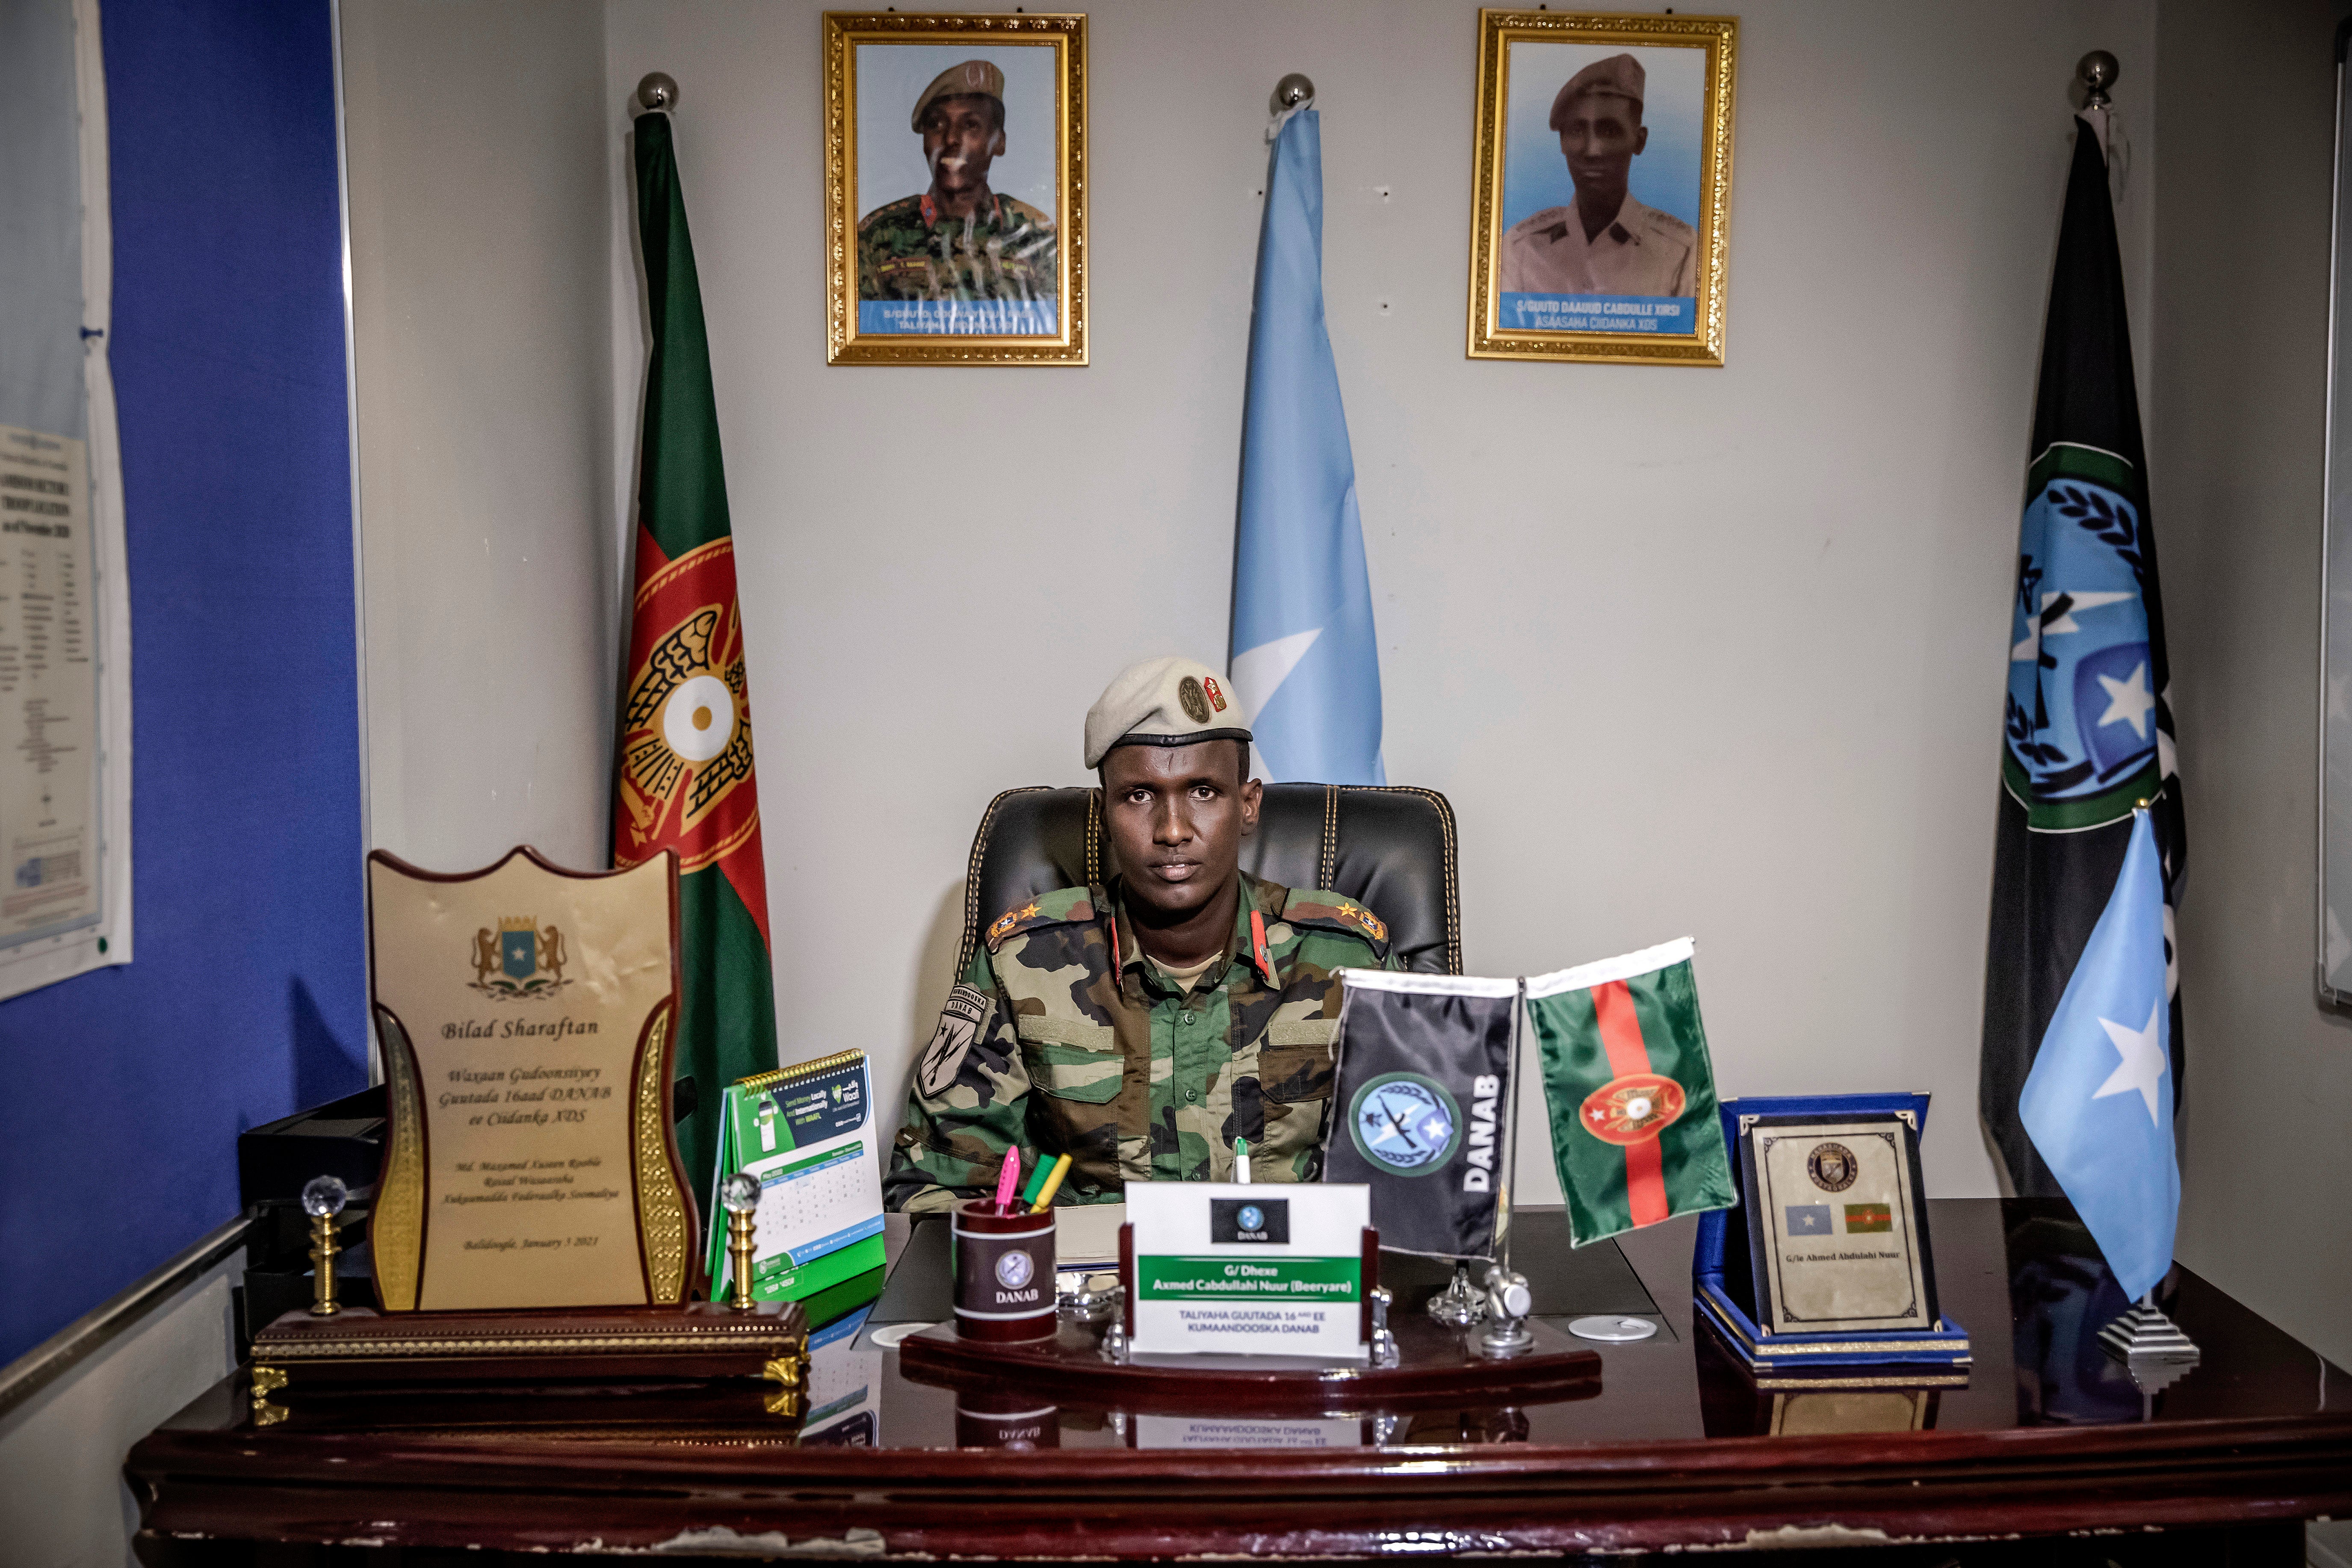 Lt Col Ahmed Abdullahi Nuur is the brigade commander for Somalia’s Danab unit, an elite force of 1,600 fighters